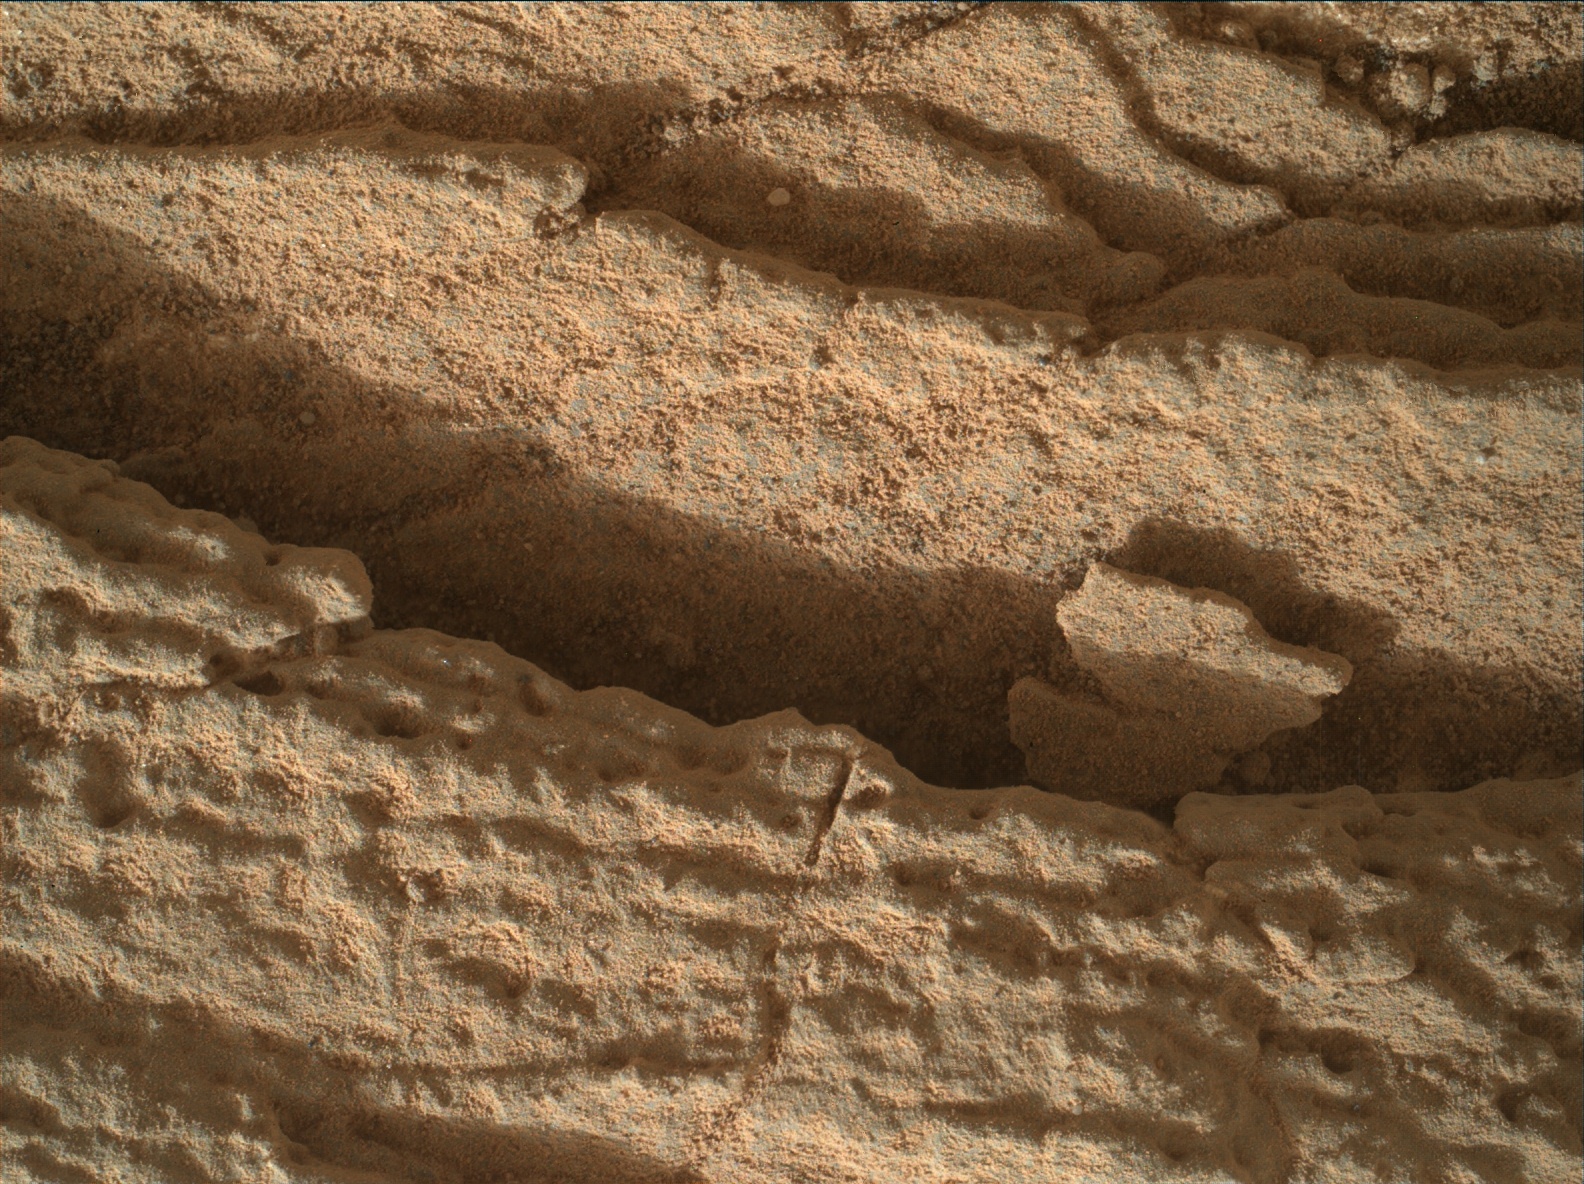 Nasa's Mars rover Curiosity acquired this image using its Mars Hand Lens Imager (MAHLI) on Sol 833